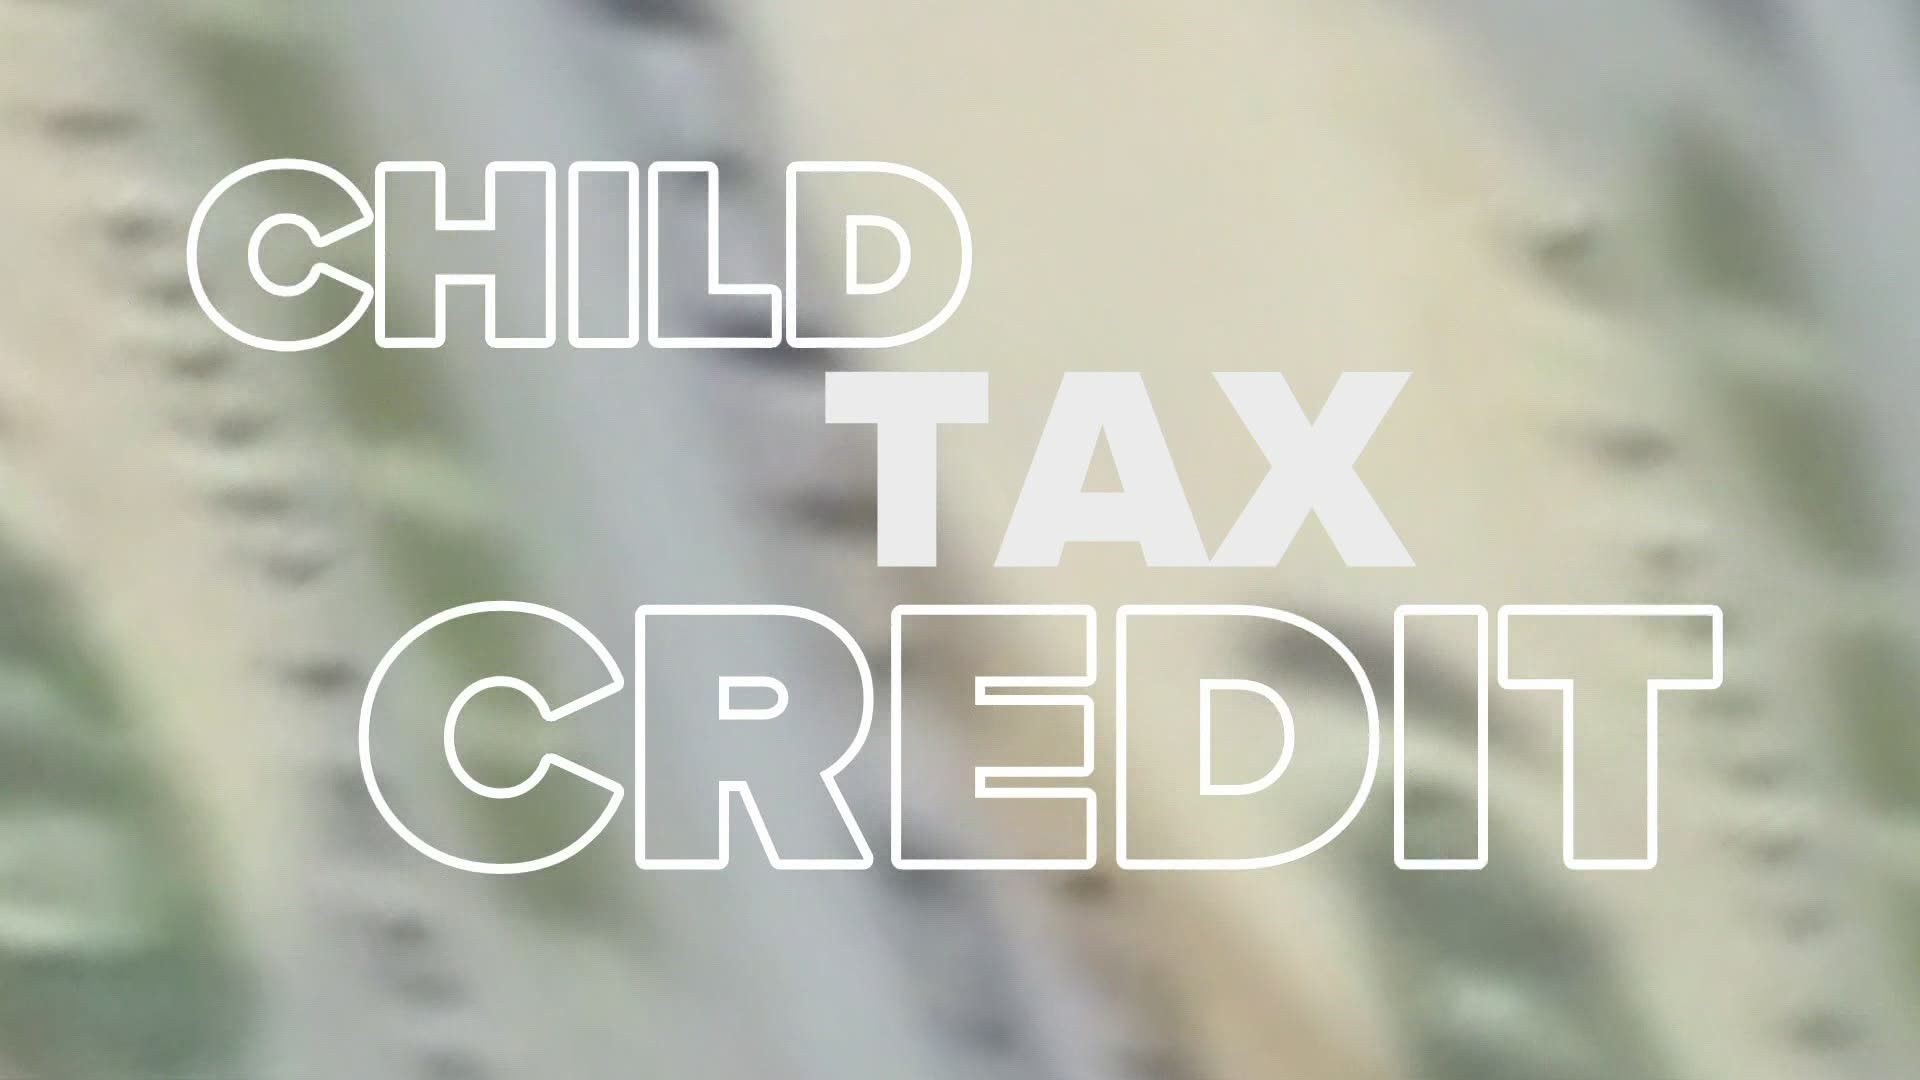 The expansion of the child tax credit means more money for most families with children and checks that could come monthly.